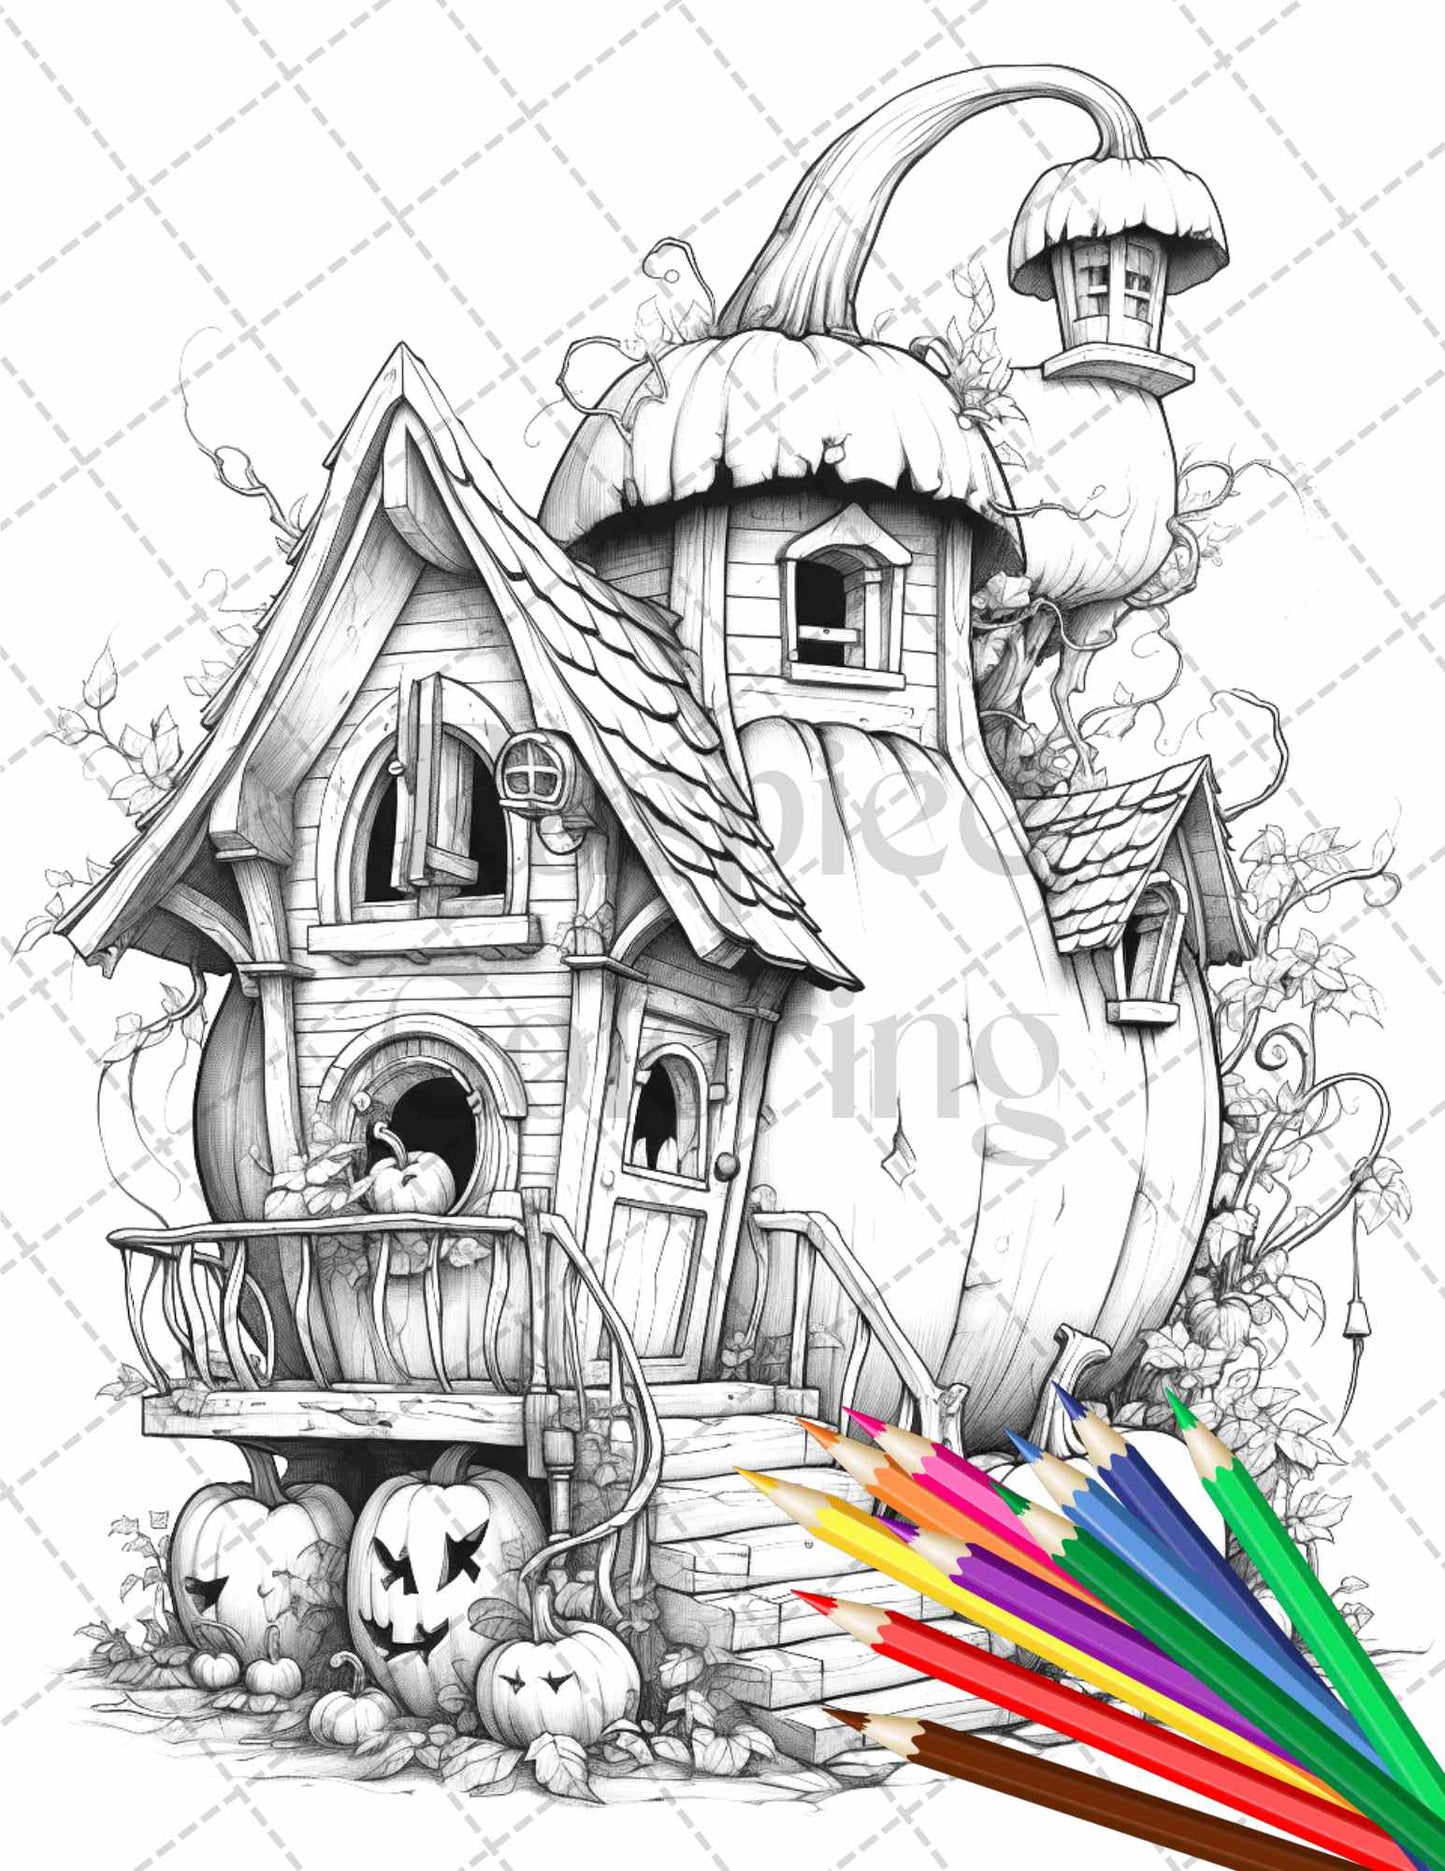 40 Pumpkin Fairy Houses Grayscale Coloring Pages Printable for Adults, PDF File Instant Download - raspiee